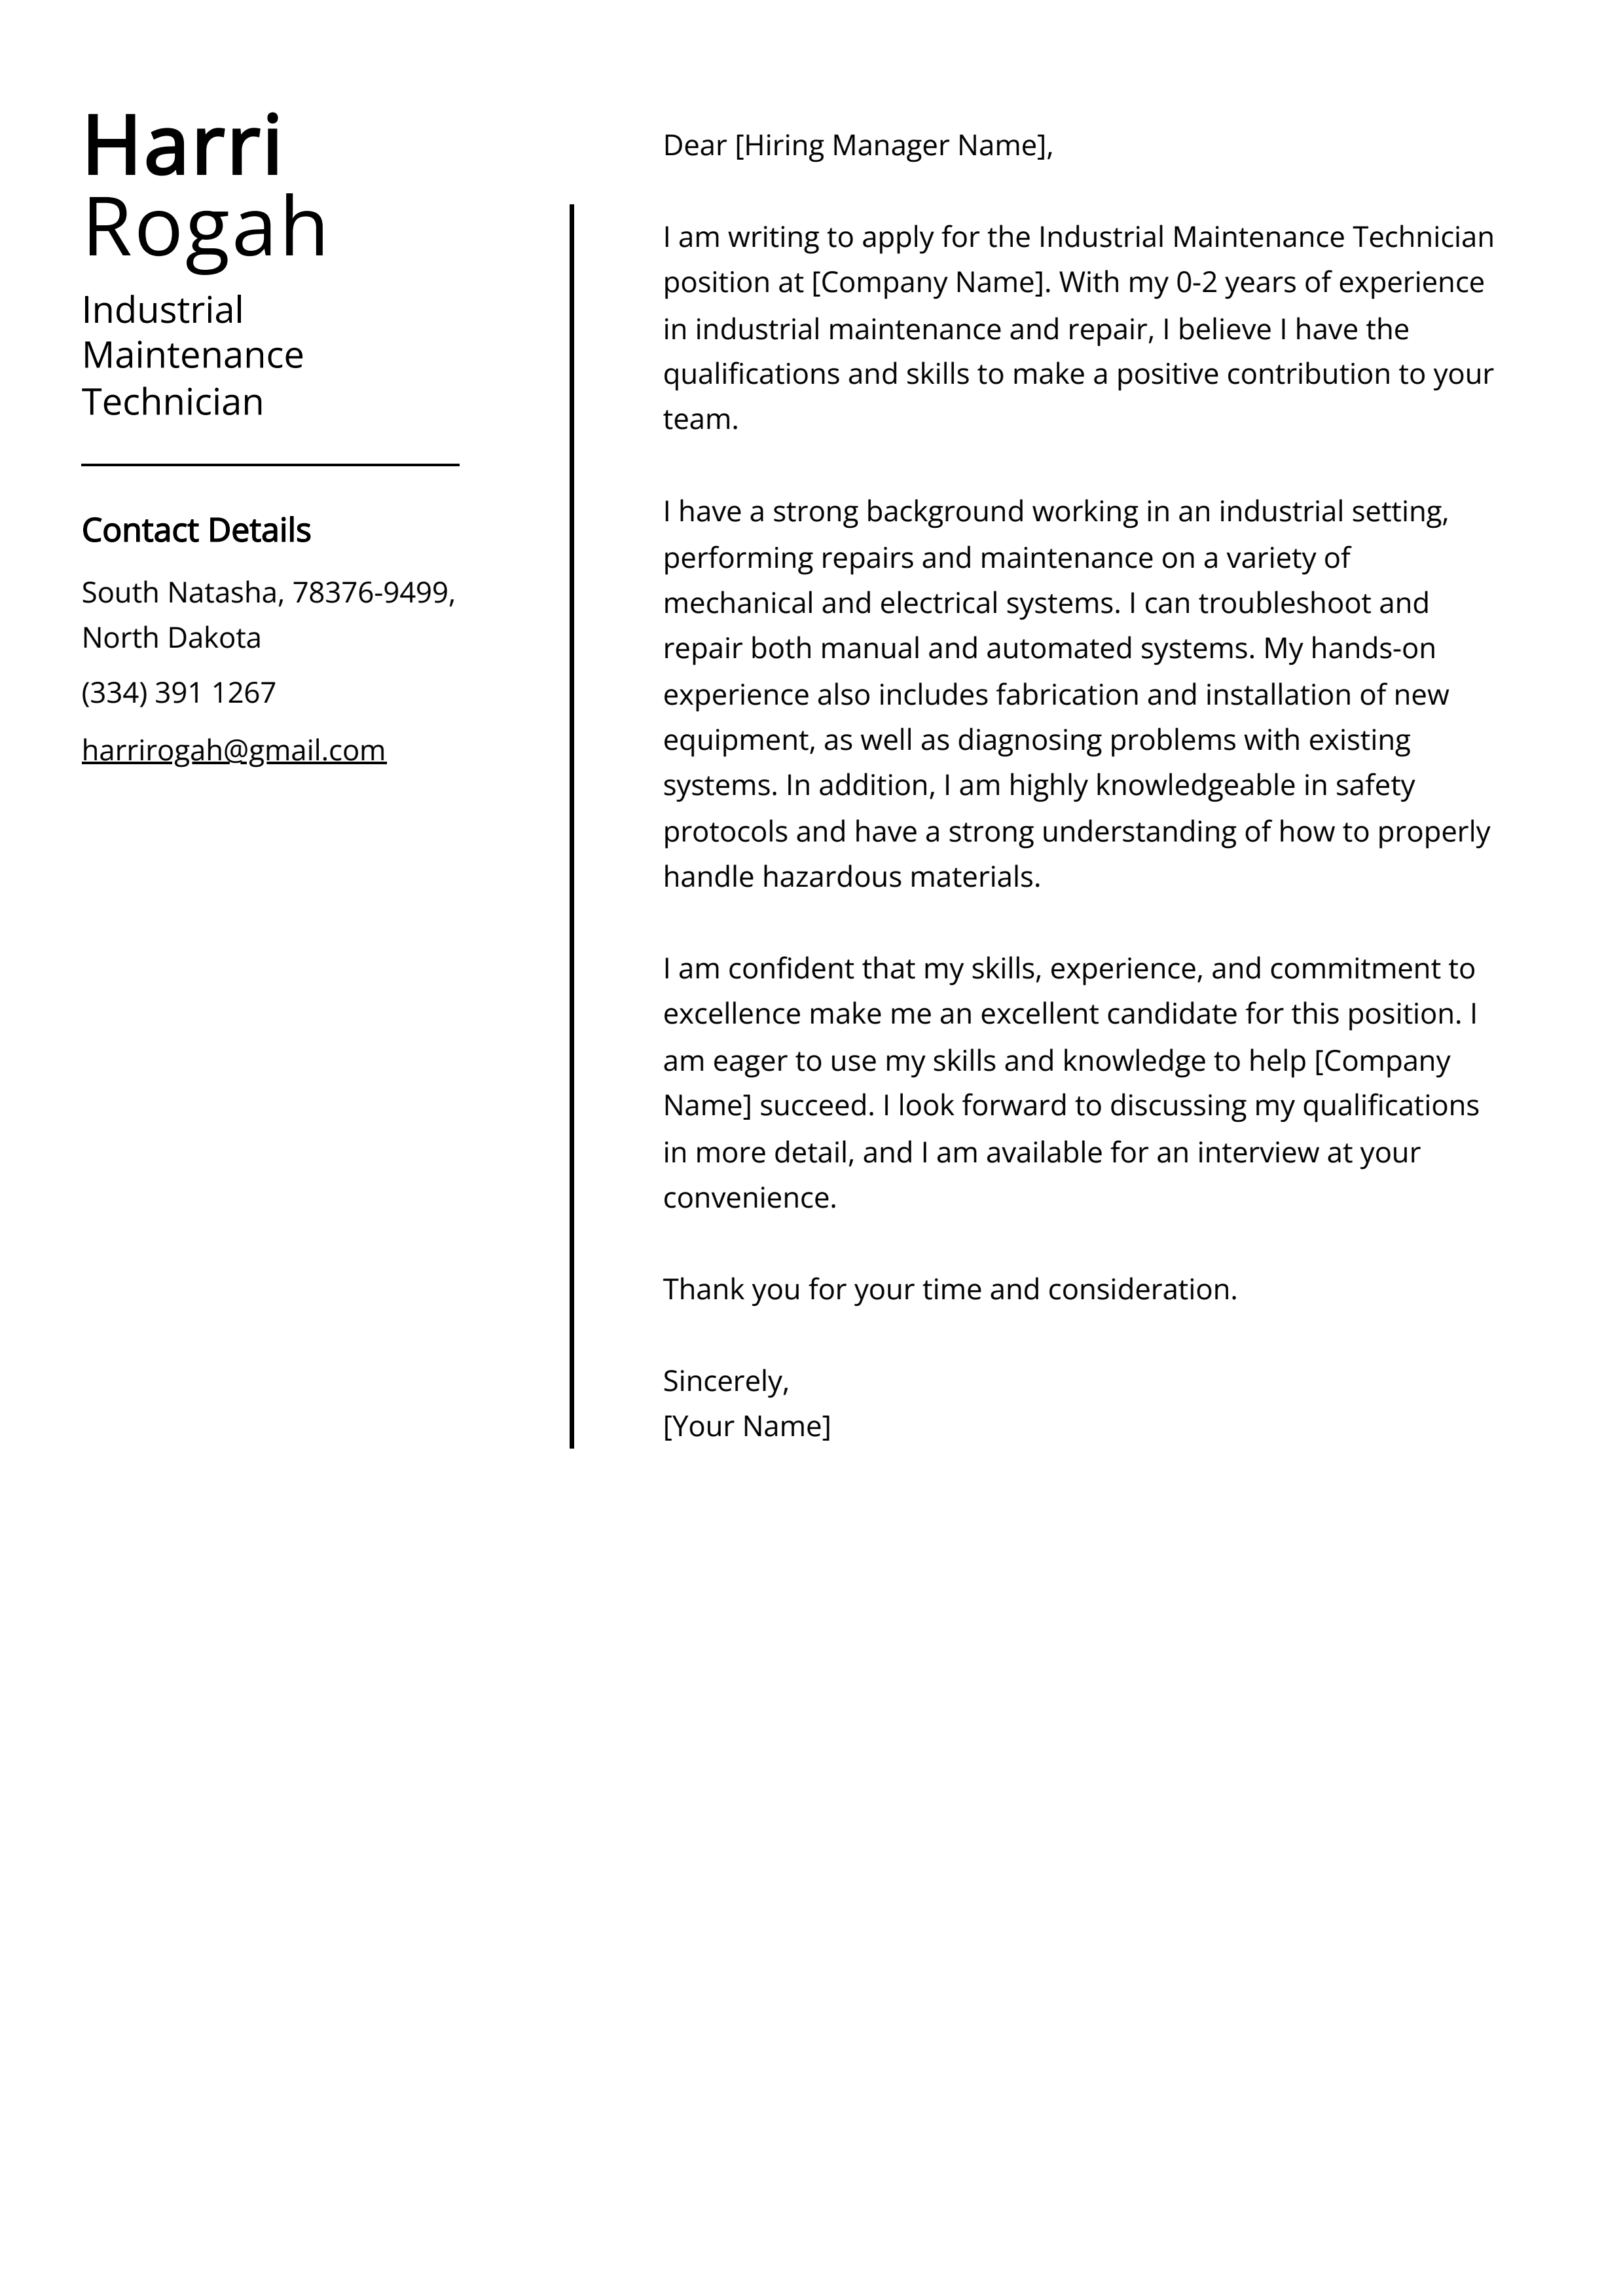 Industrial Maintenance Technician Cover Letter Example